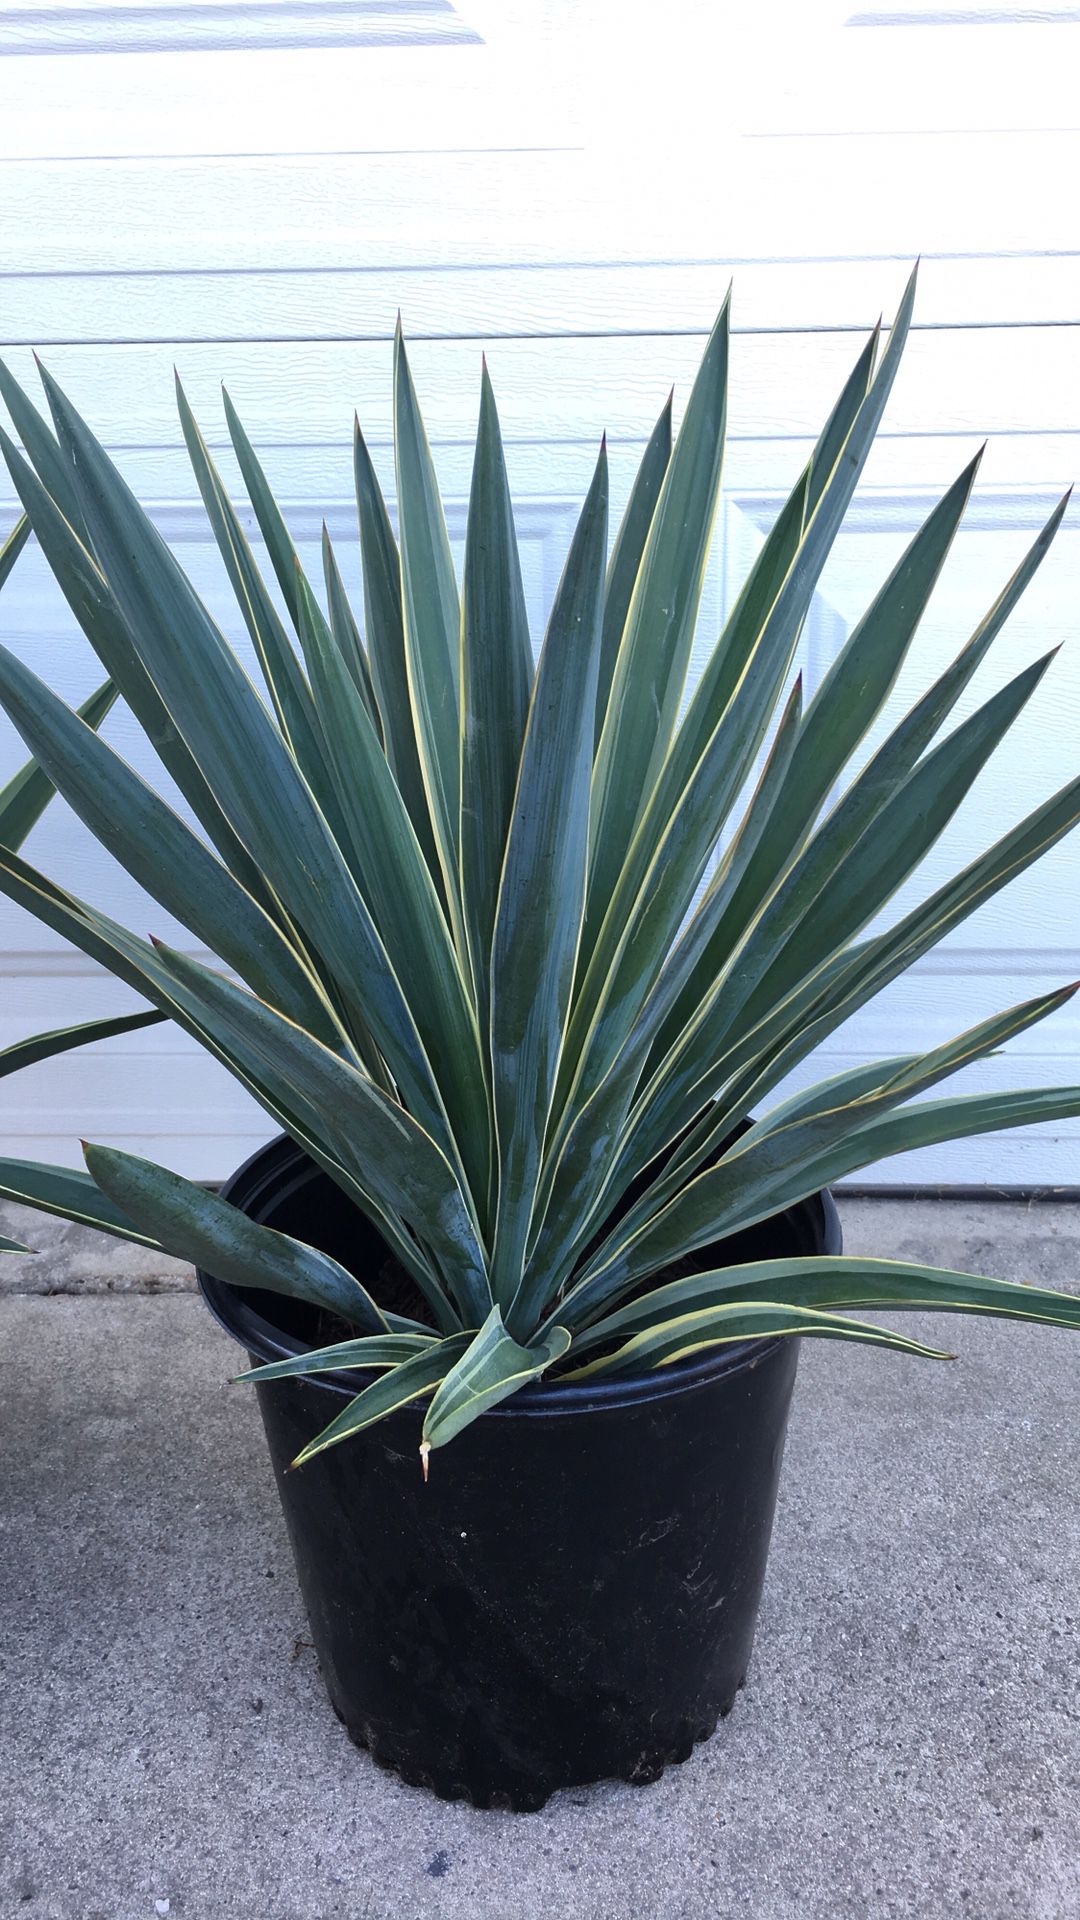 Big 🌱Tall🌱Healthy 🌱and Beautiful Agaves in 2 gallon containers - $16 each - Valued $24.99 each - Outdoor Plant - Less water